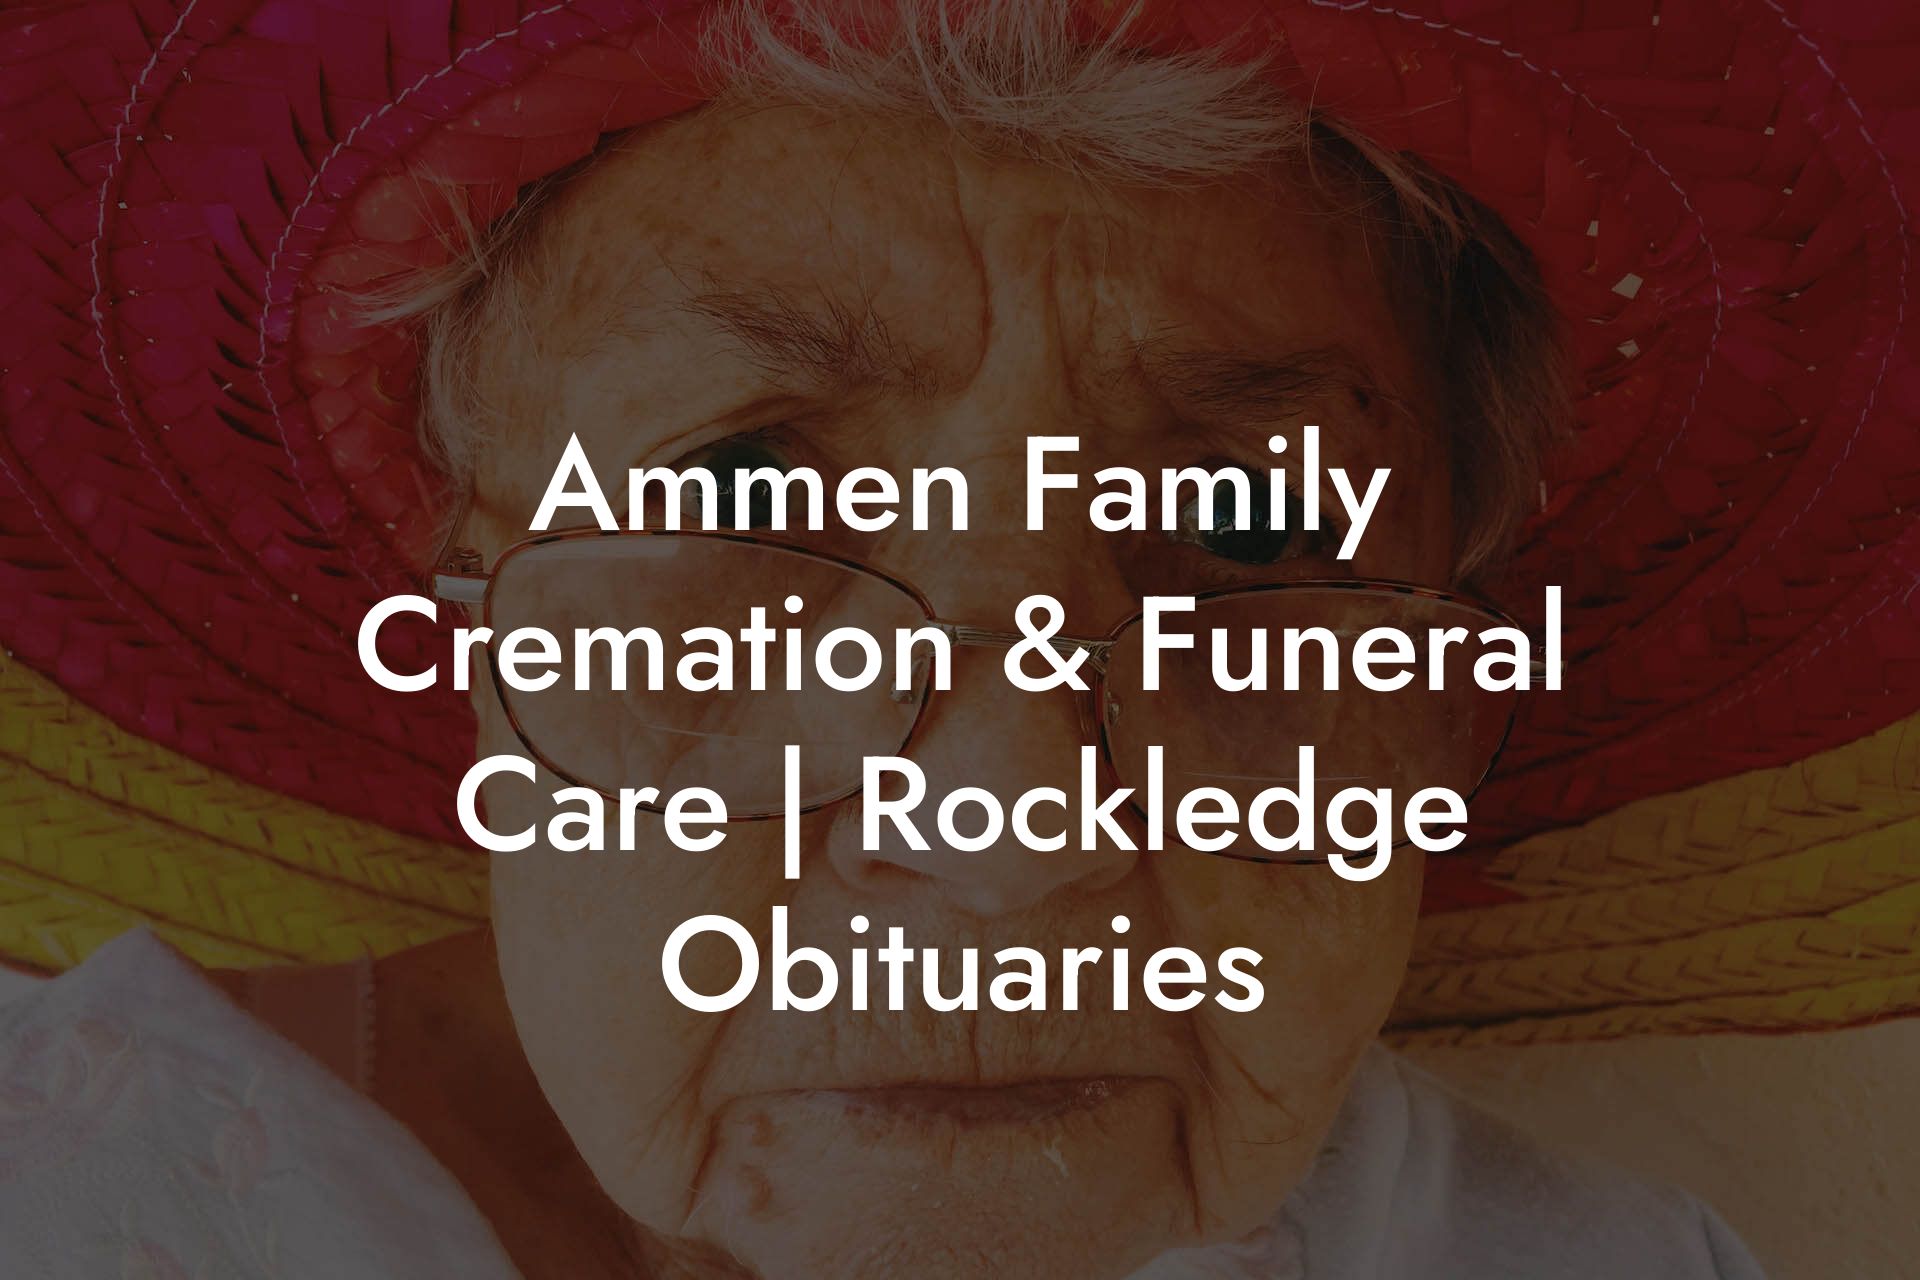 Ammen Family Cremation & Funeral Care | Rockledge Obituaries